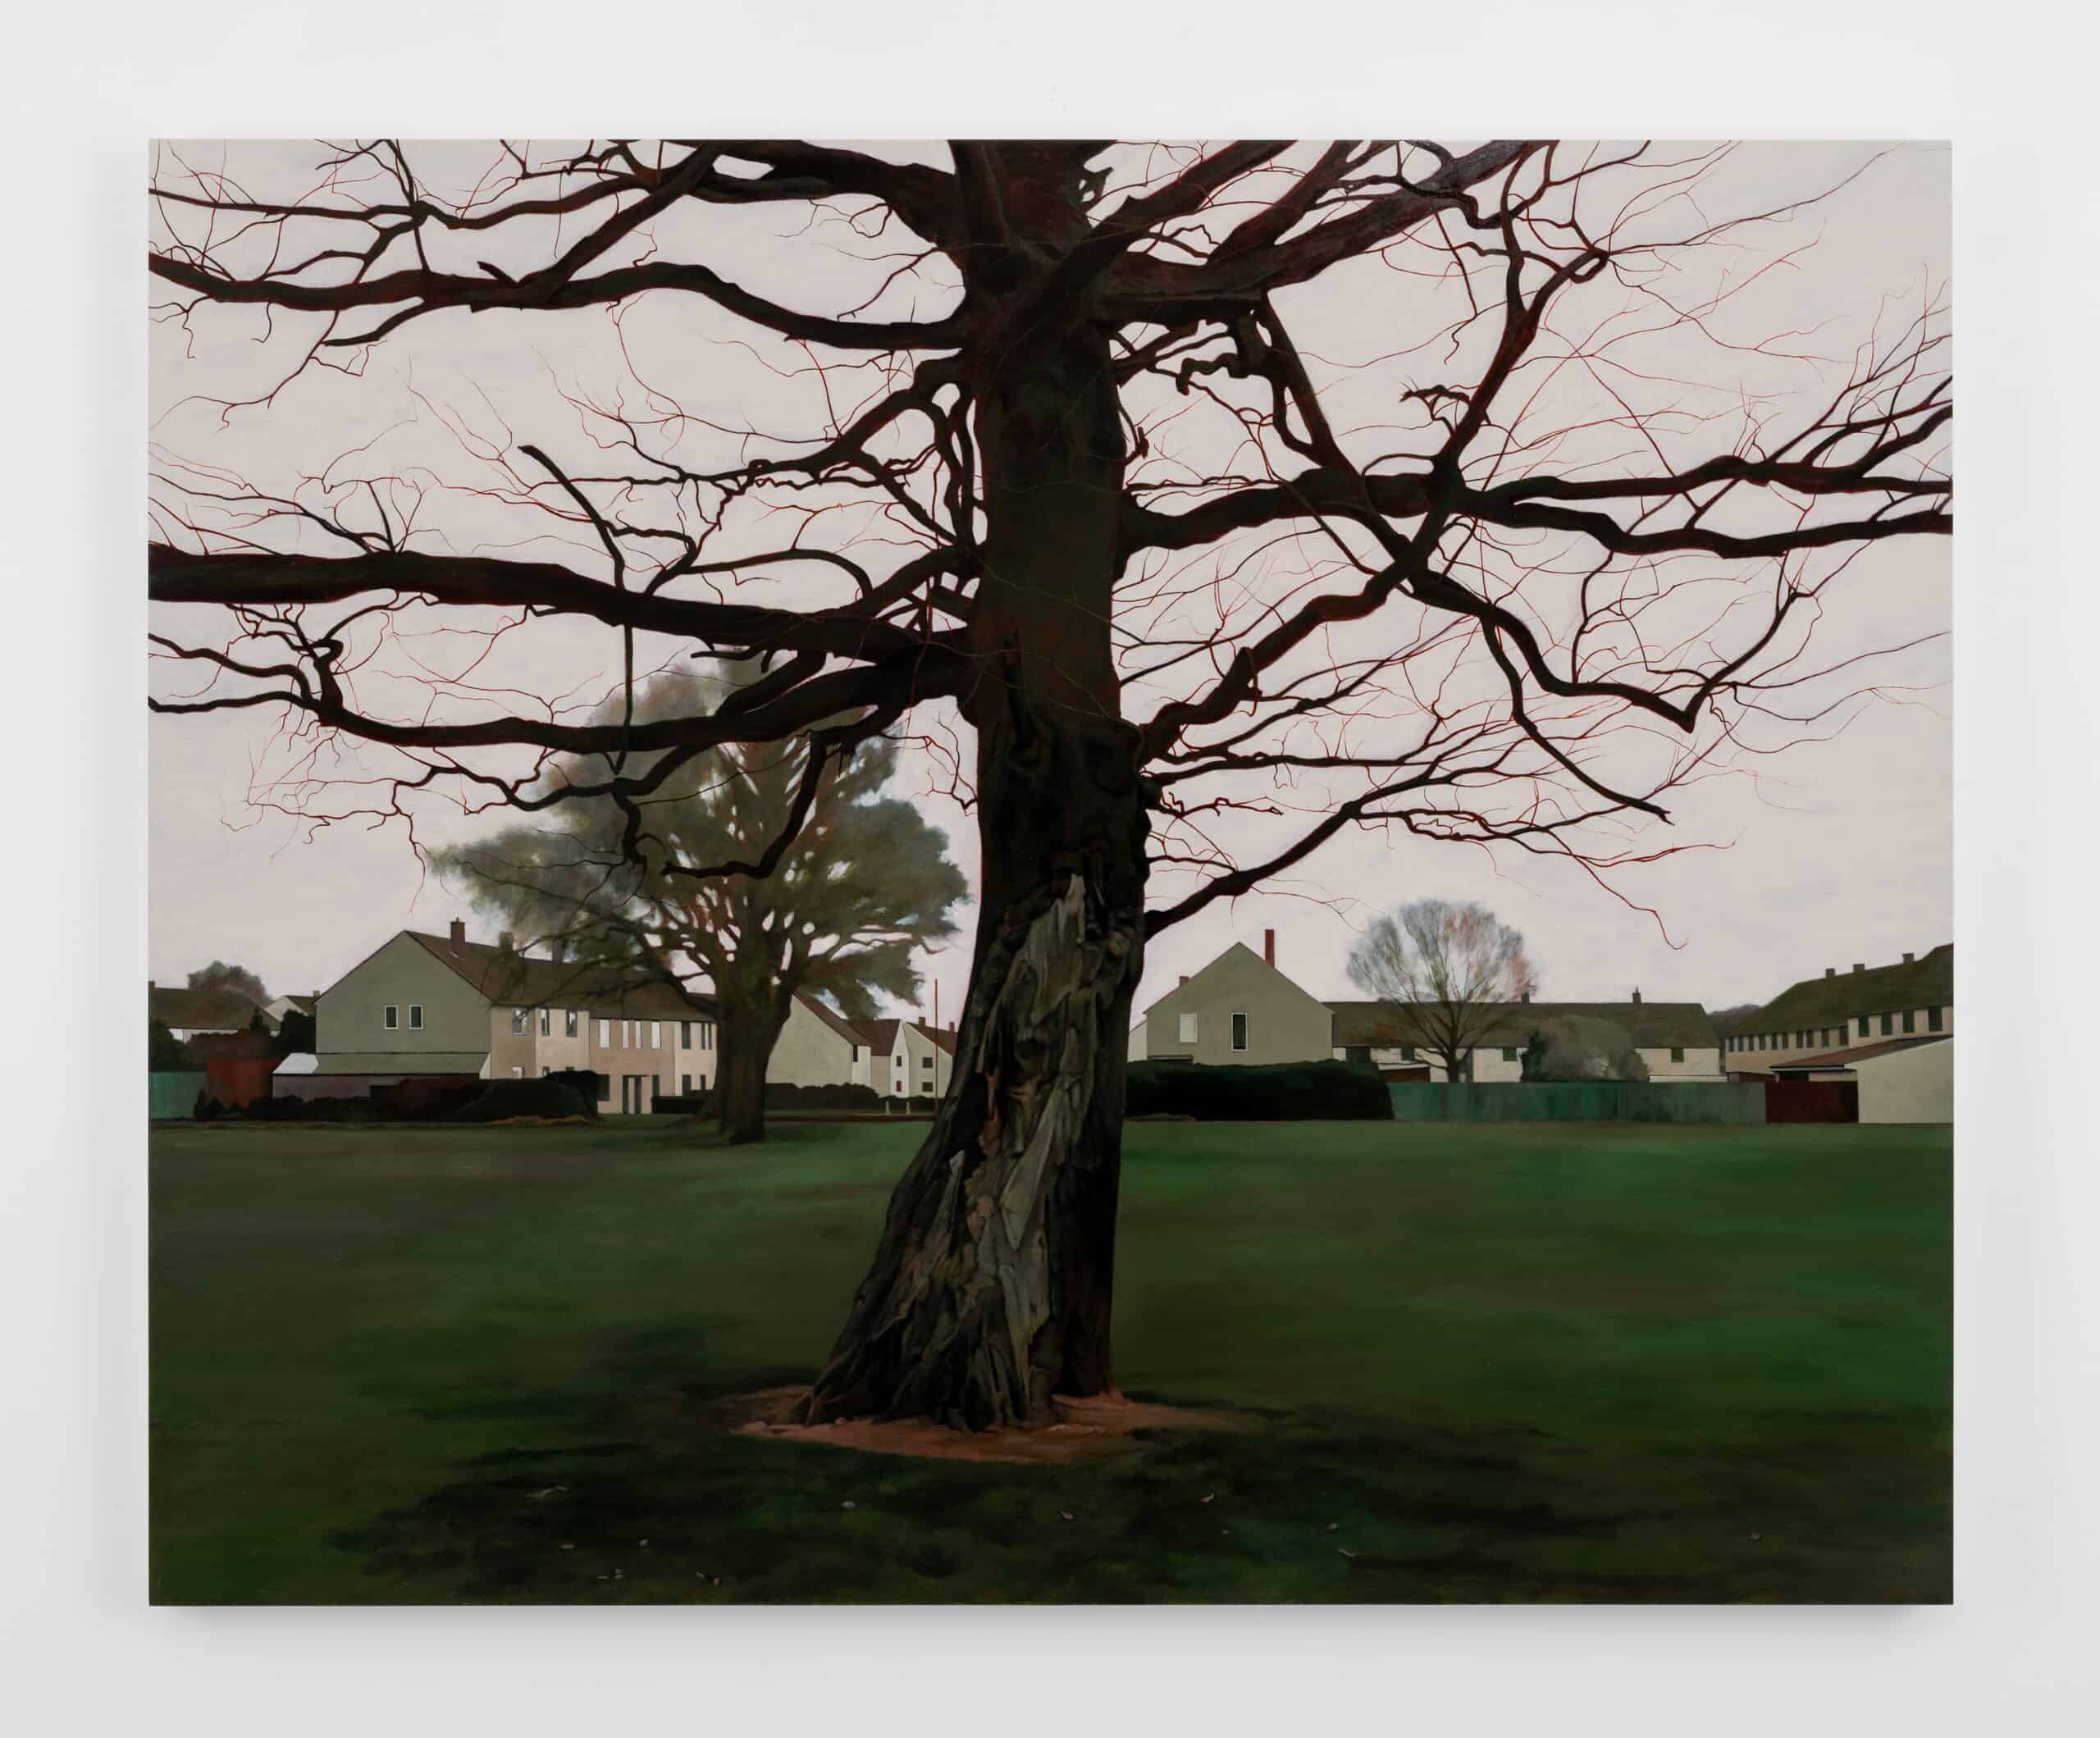 George Shaw, Survivors 1, 2020, Time + Place, Huxley-Parlour Gallery, 3-5 Swallow Street, March - April 2024